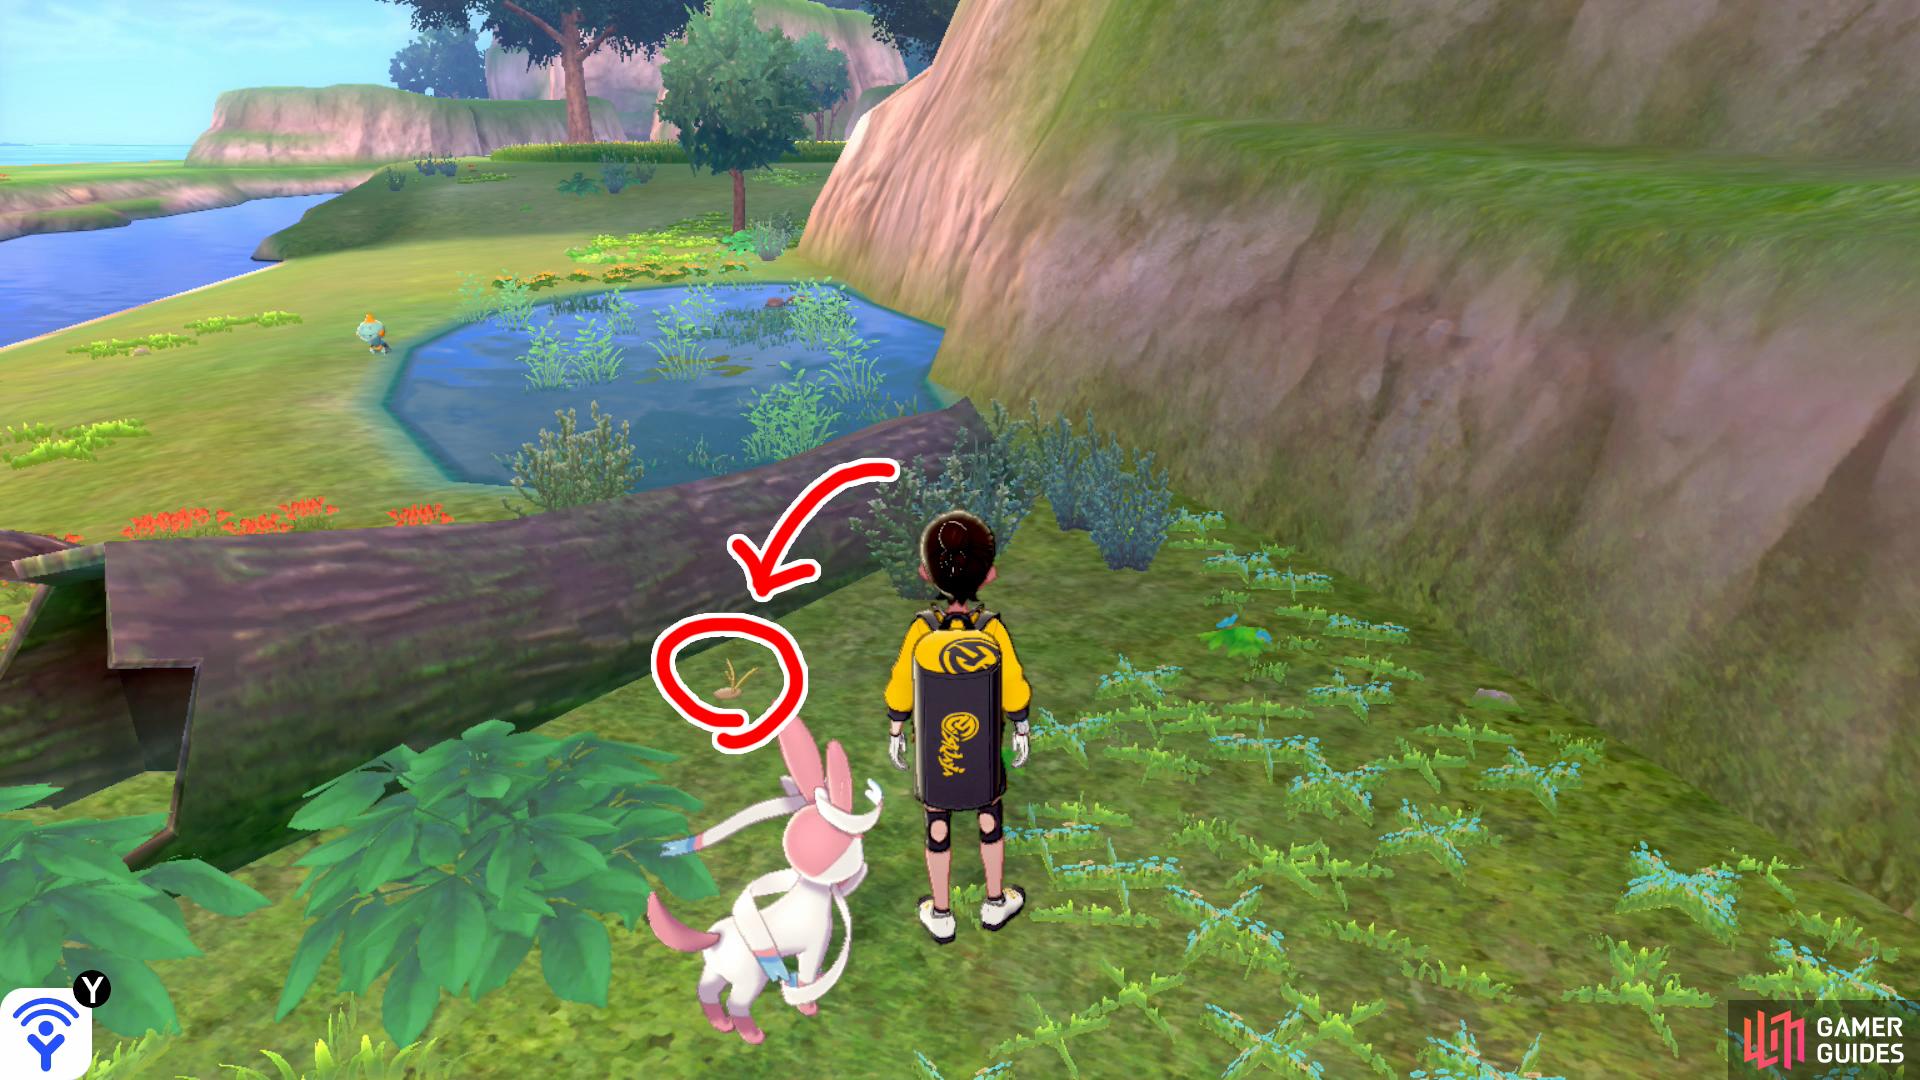 12/20: From Diglett 11, turn left (while facing the tower) and travel parallel to the cliff wall. As you get near Courageous Cavern, there's a shallow pool on the left side. Past the pool, look behind the fallen log.